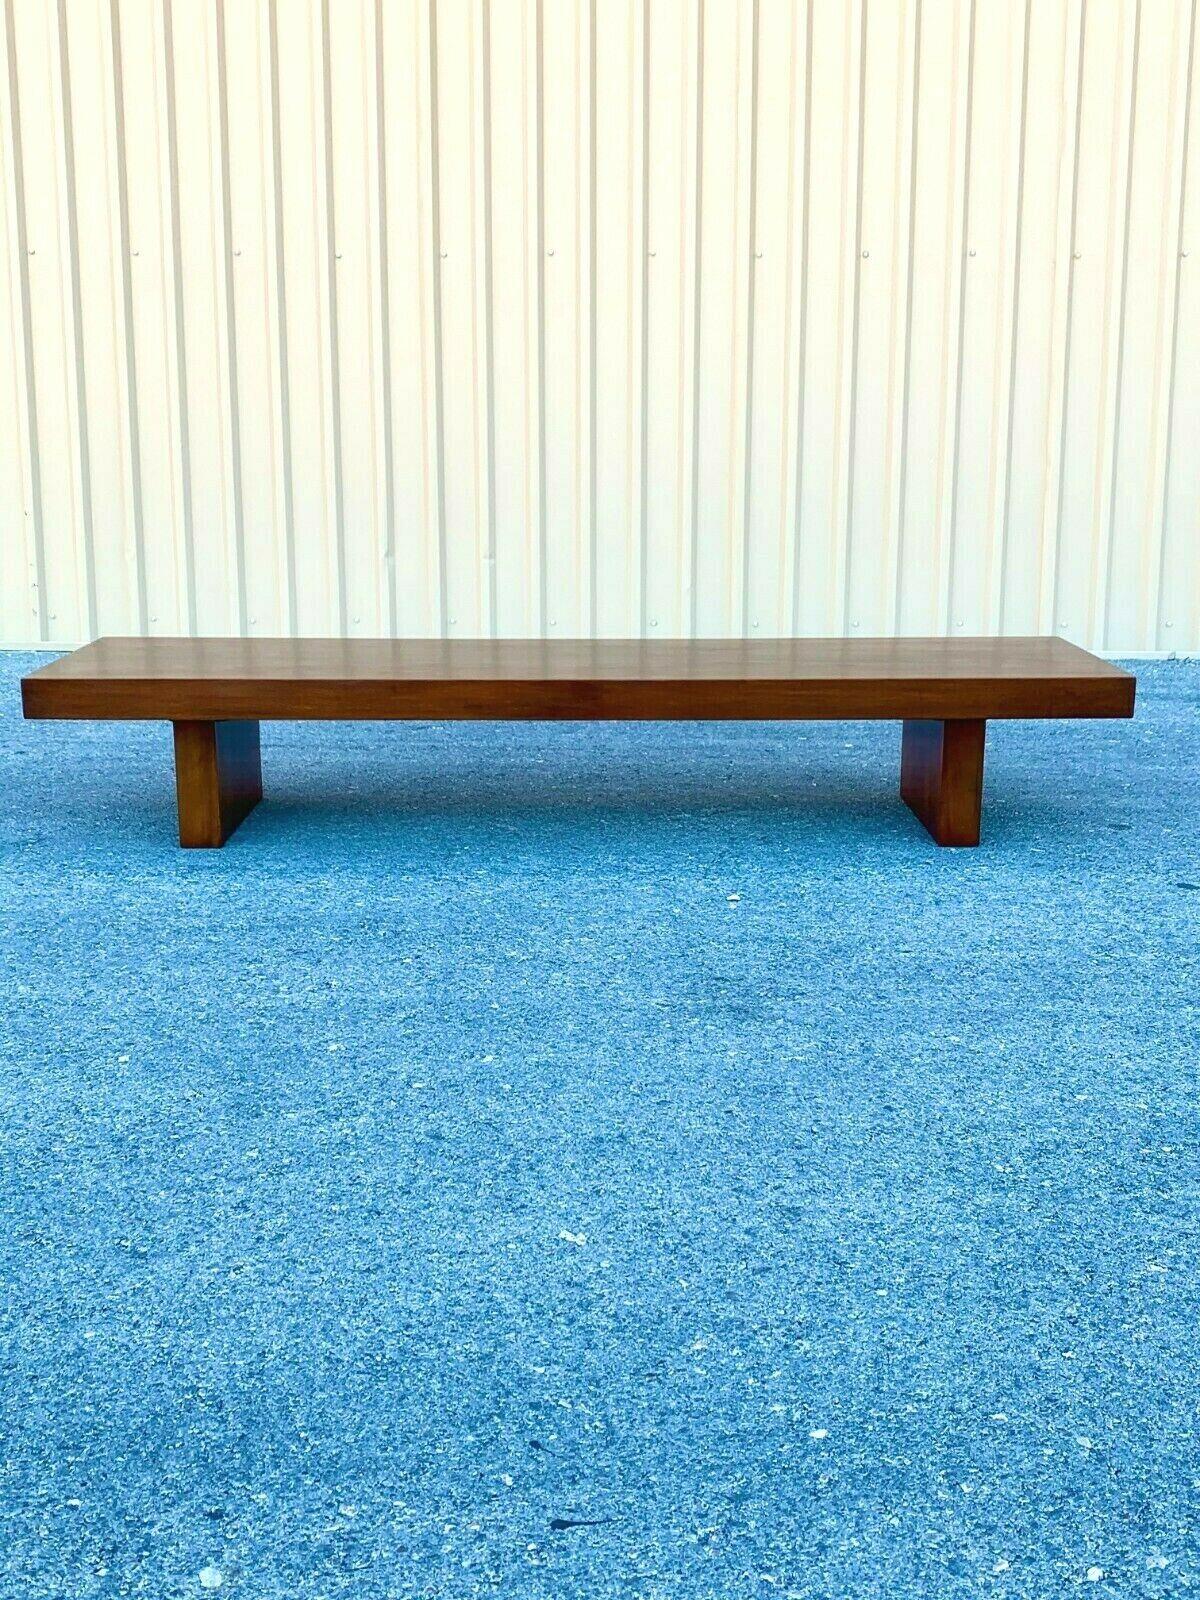 Walnut 1950's Show-Pieces Mid-Century Modern Asian Low Coffee or Teahouse Table Bench